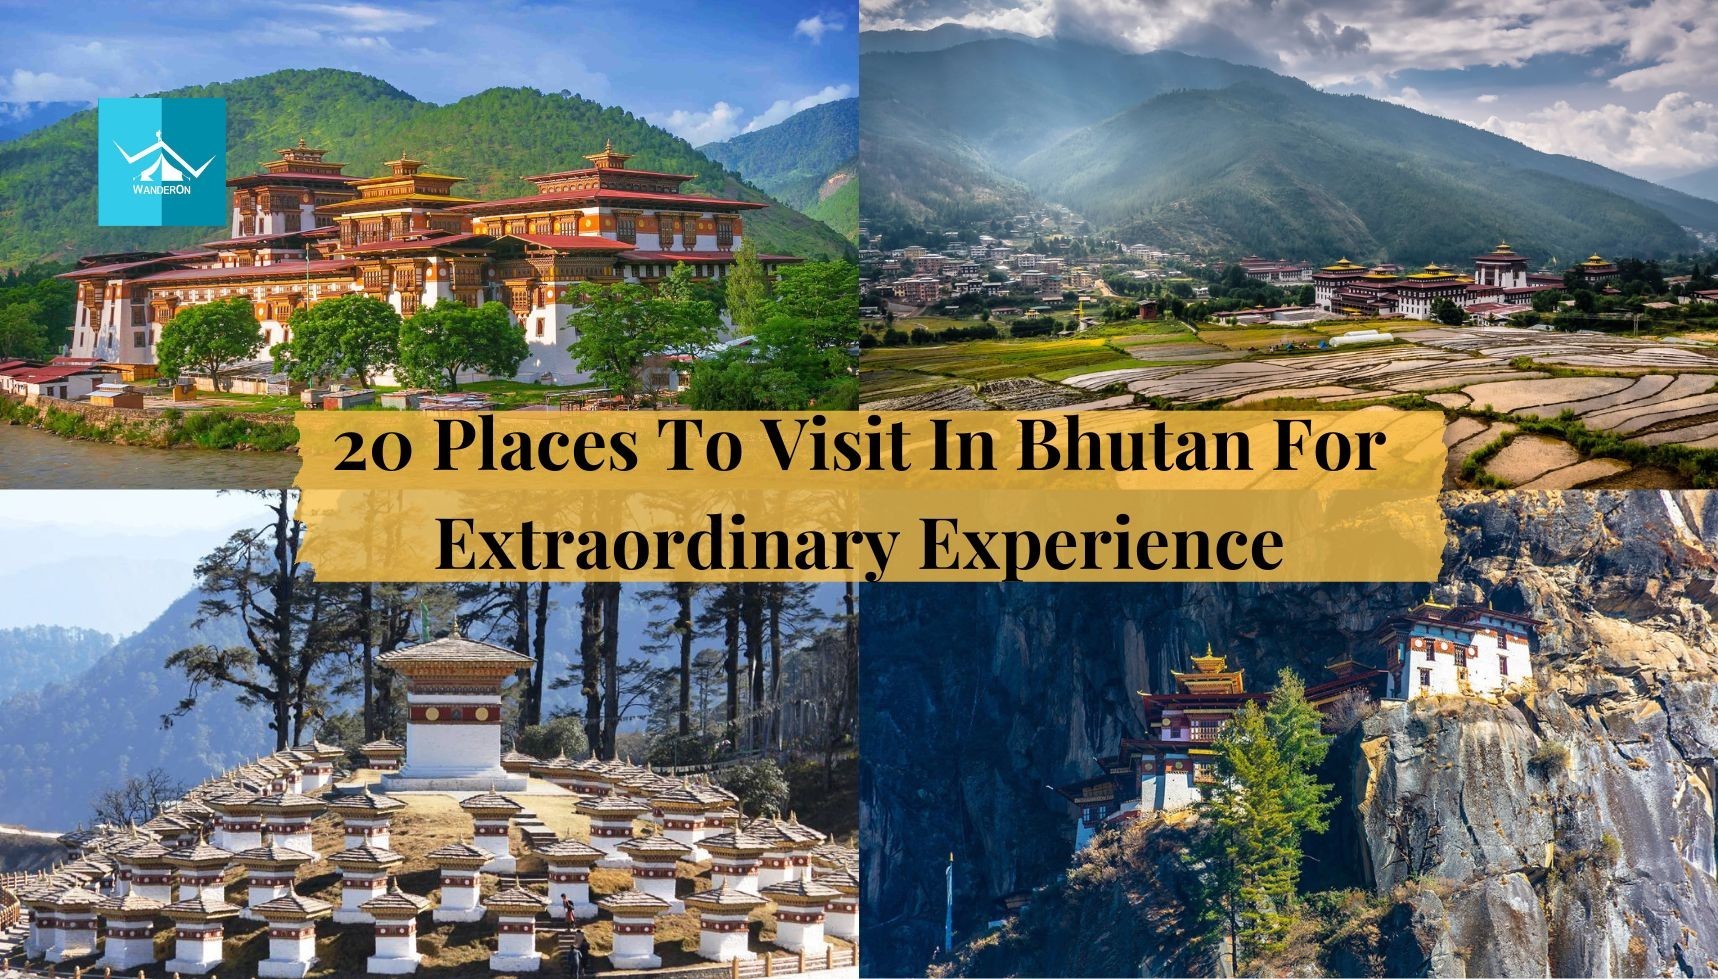 Discover 20 Extraordinary Places to Visit in Bhutan